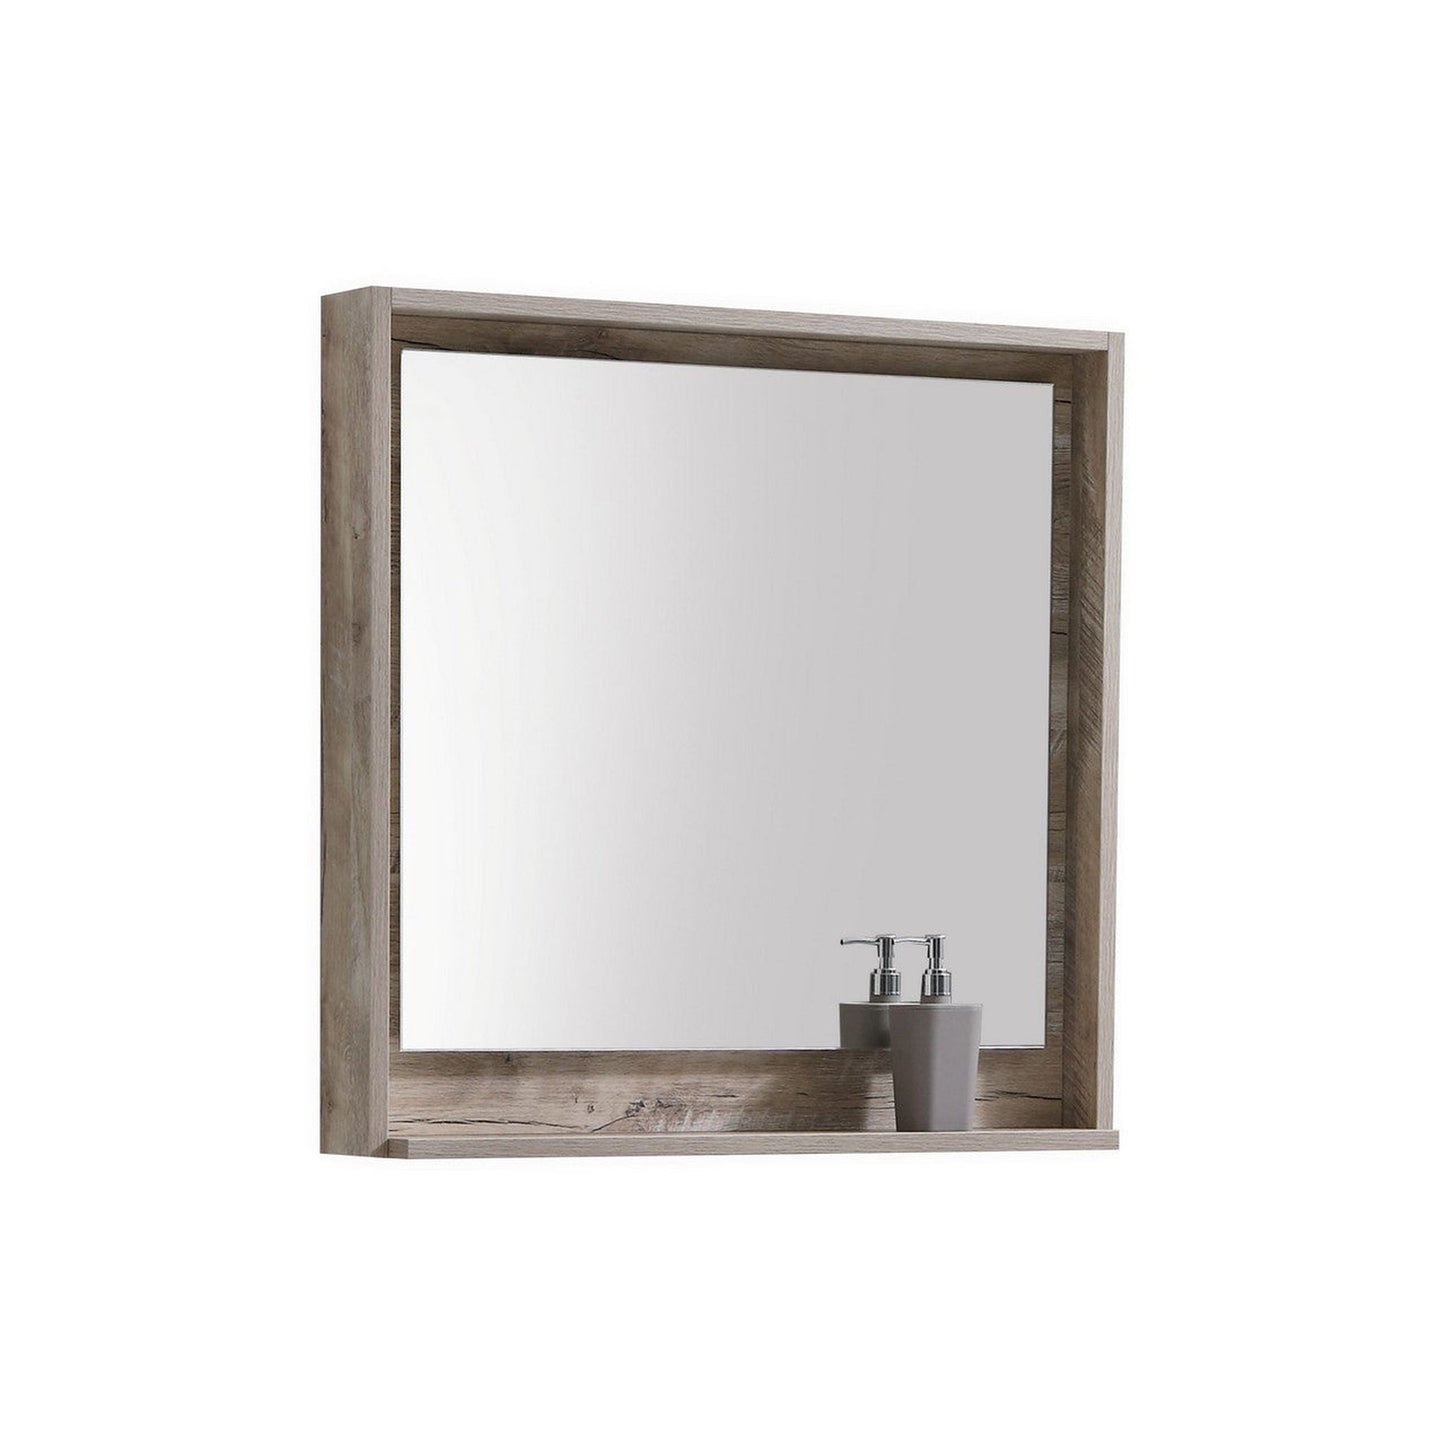 KubeBath Bliss 30" Nature Wood Wall-Mounted Modern Bathroom Vanity With Single Integrated Acrylic Sink With Overflow and 30" Wood Framed Mirror With Shelf